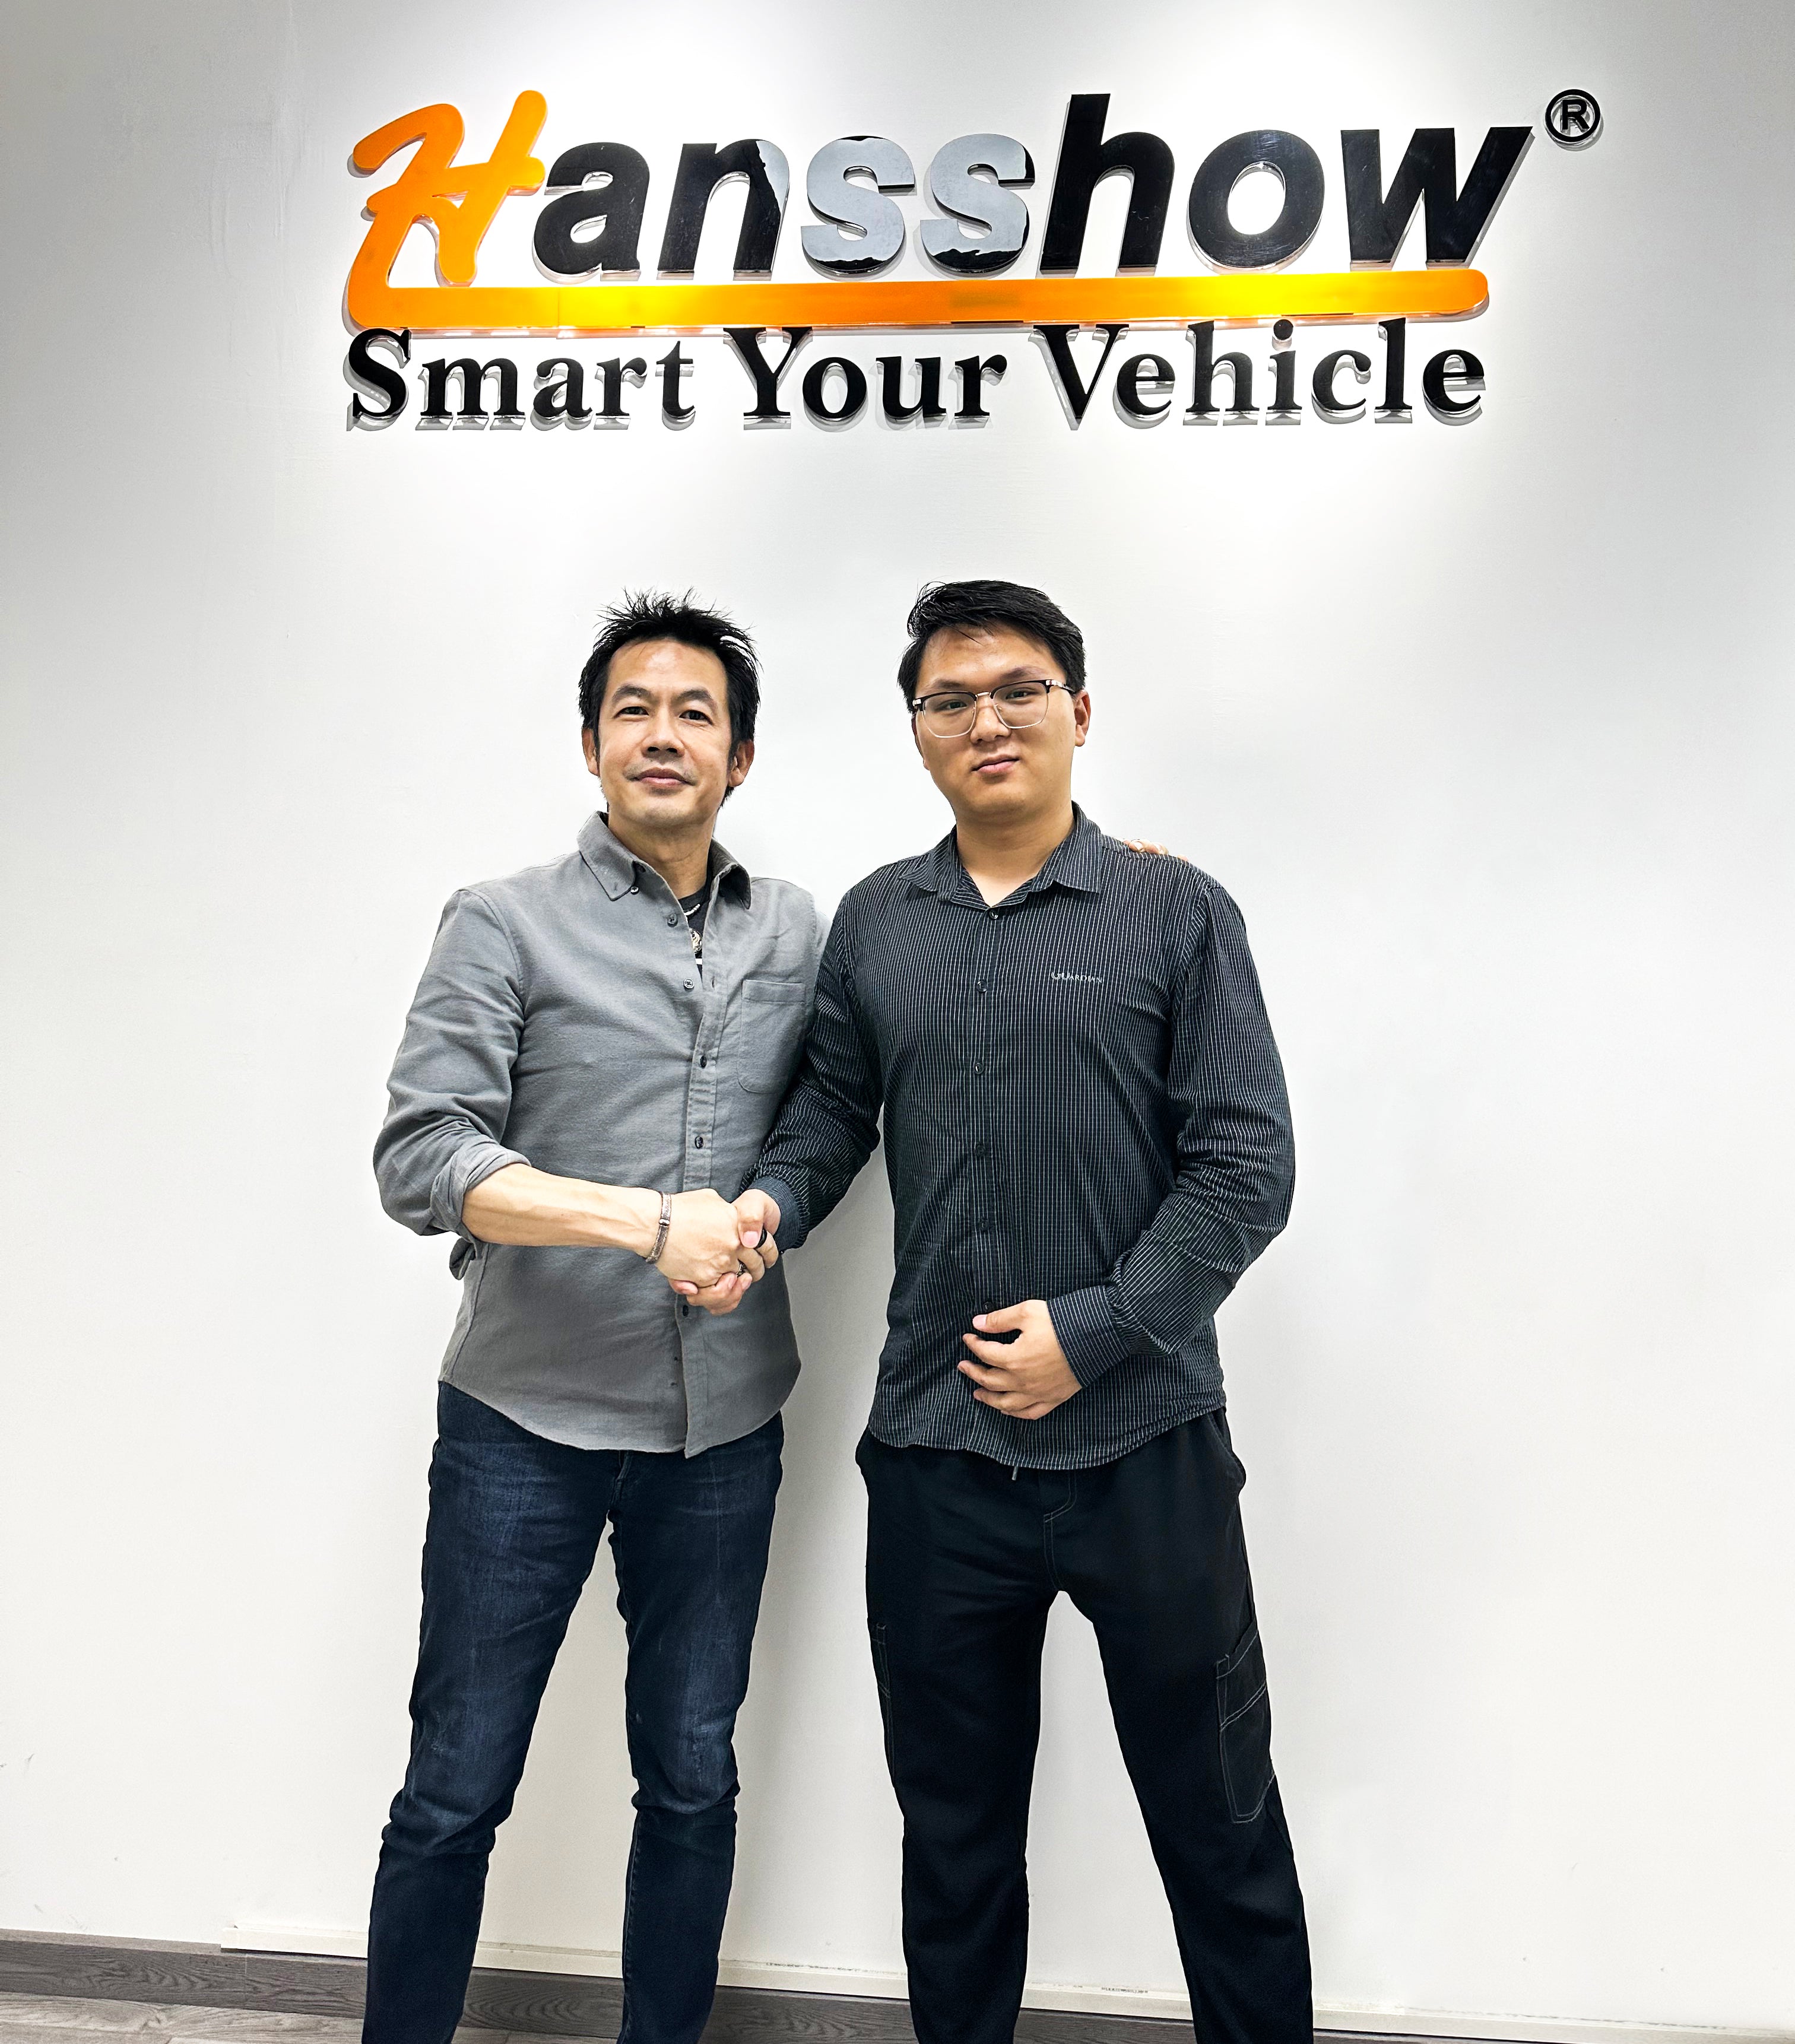 Hansshow welcomes Dynavolt Managing Director as Director of Marketing